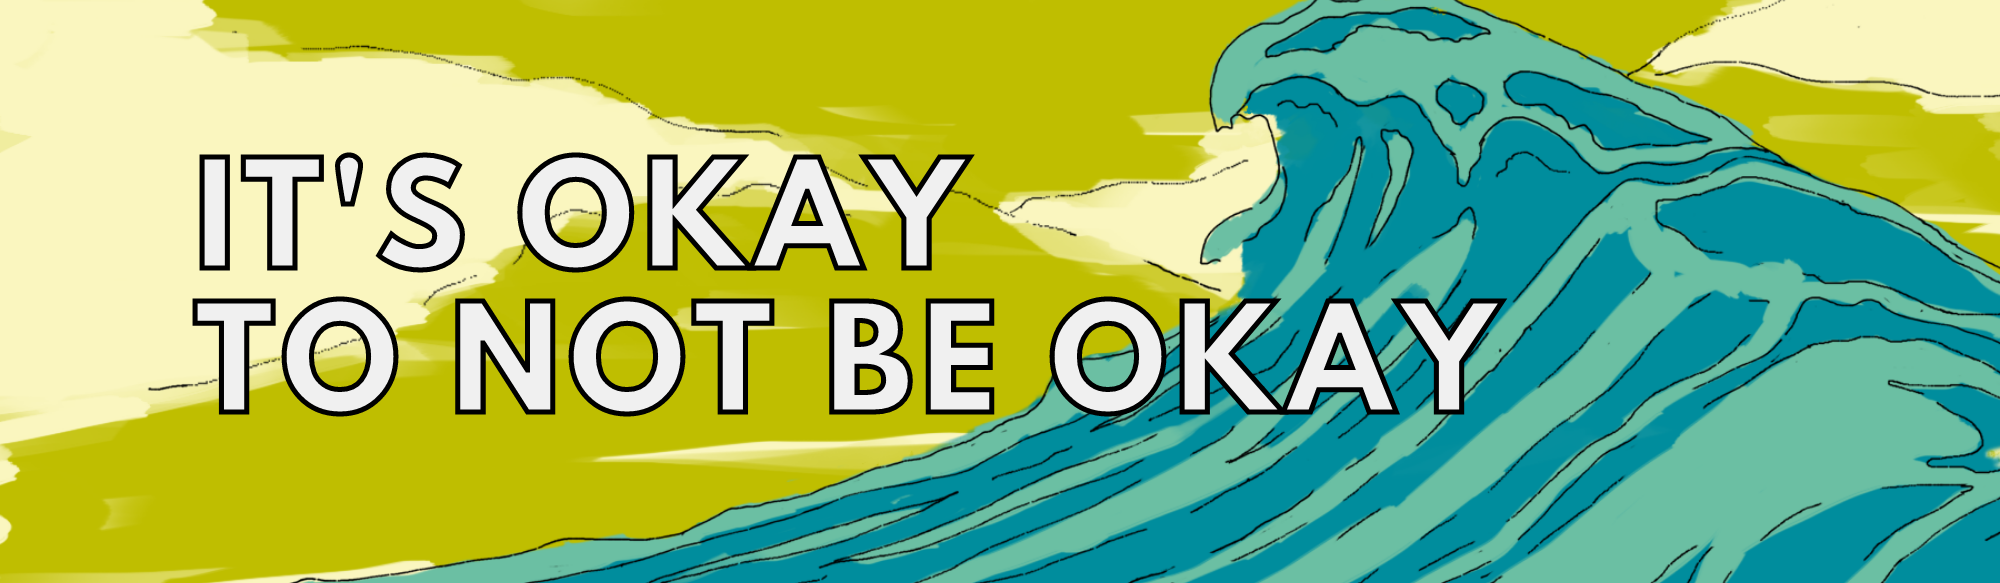 Graphic with the text "it's okay to not be okay" on top of an illustration of a wave.